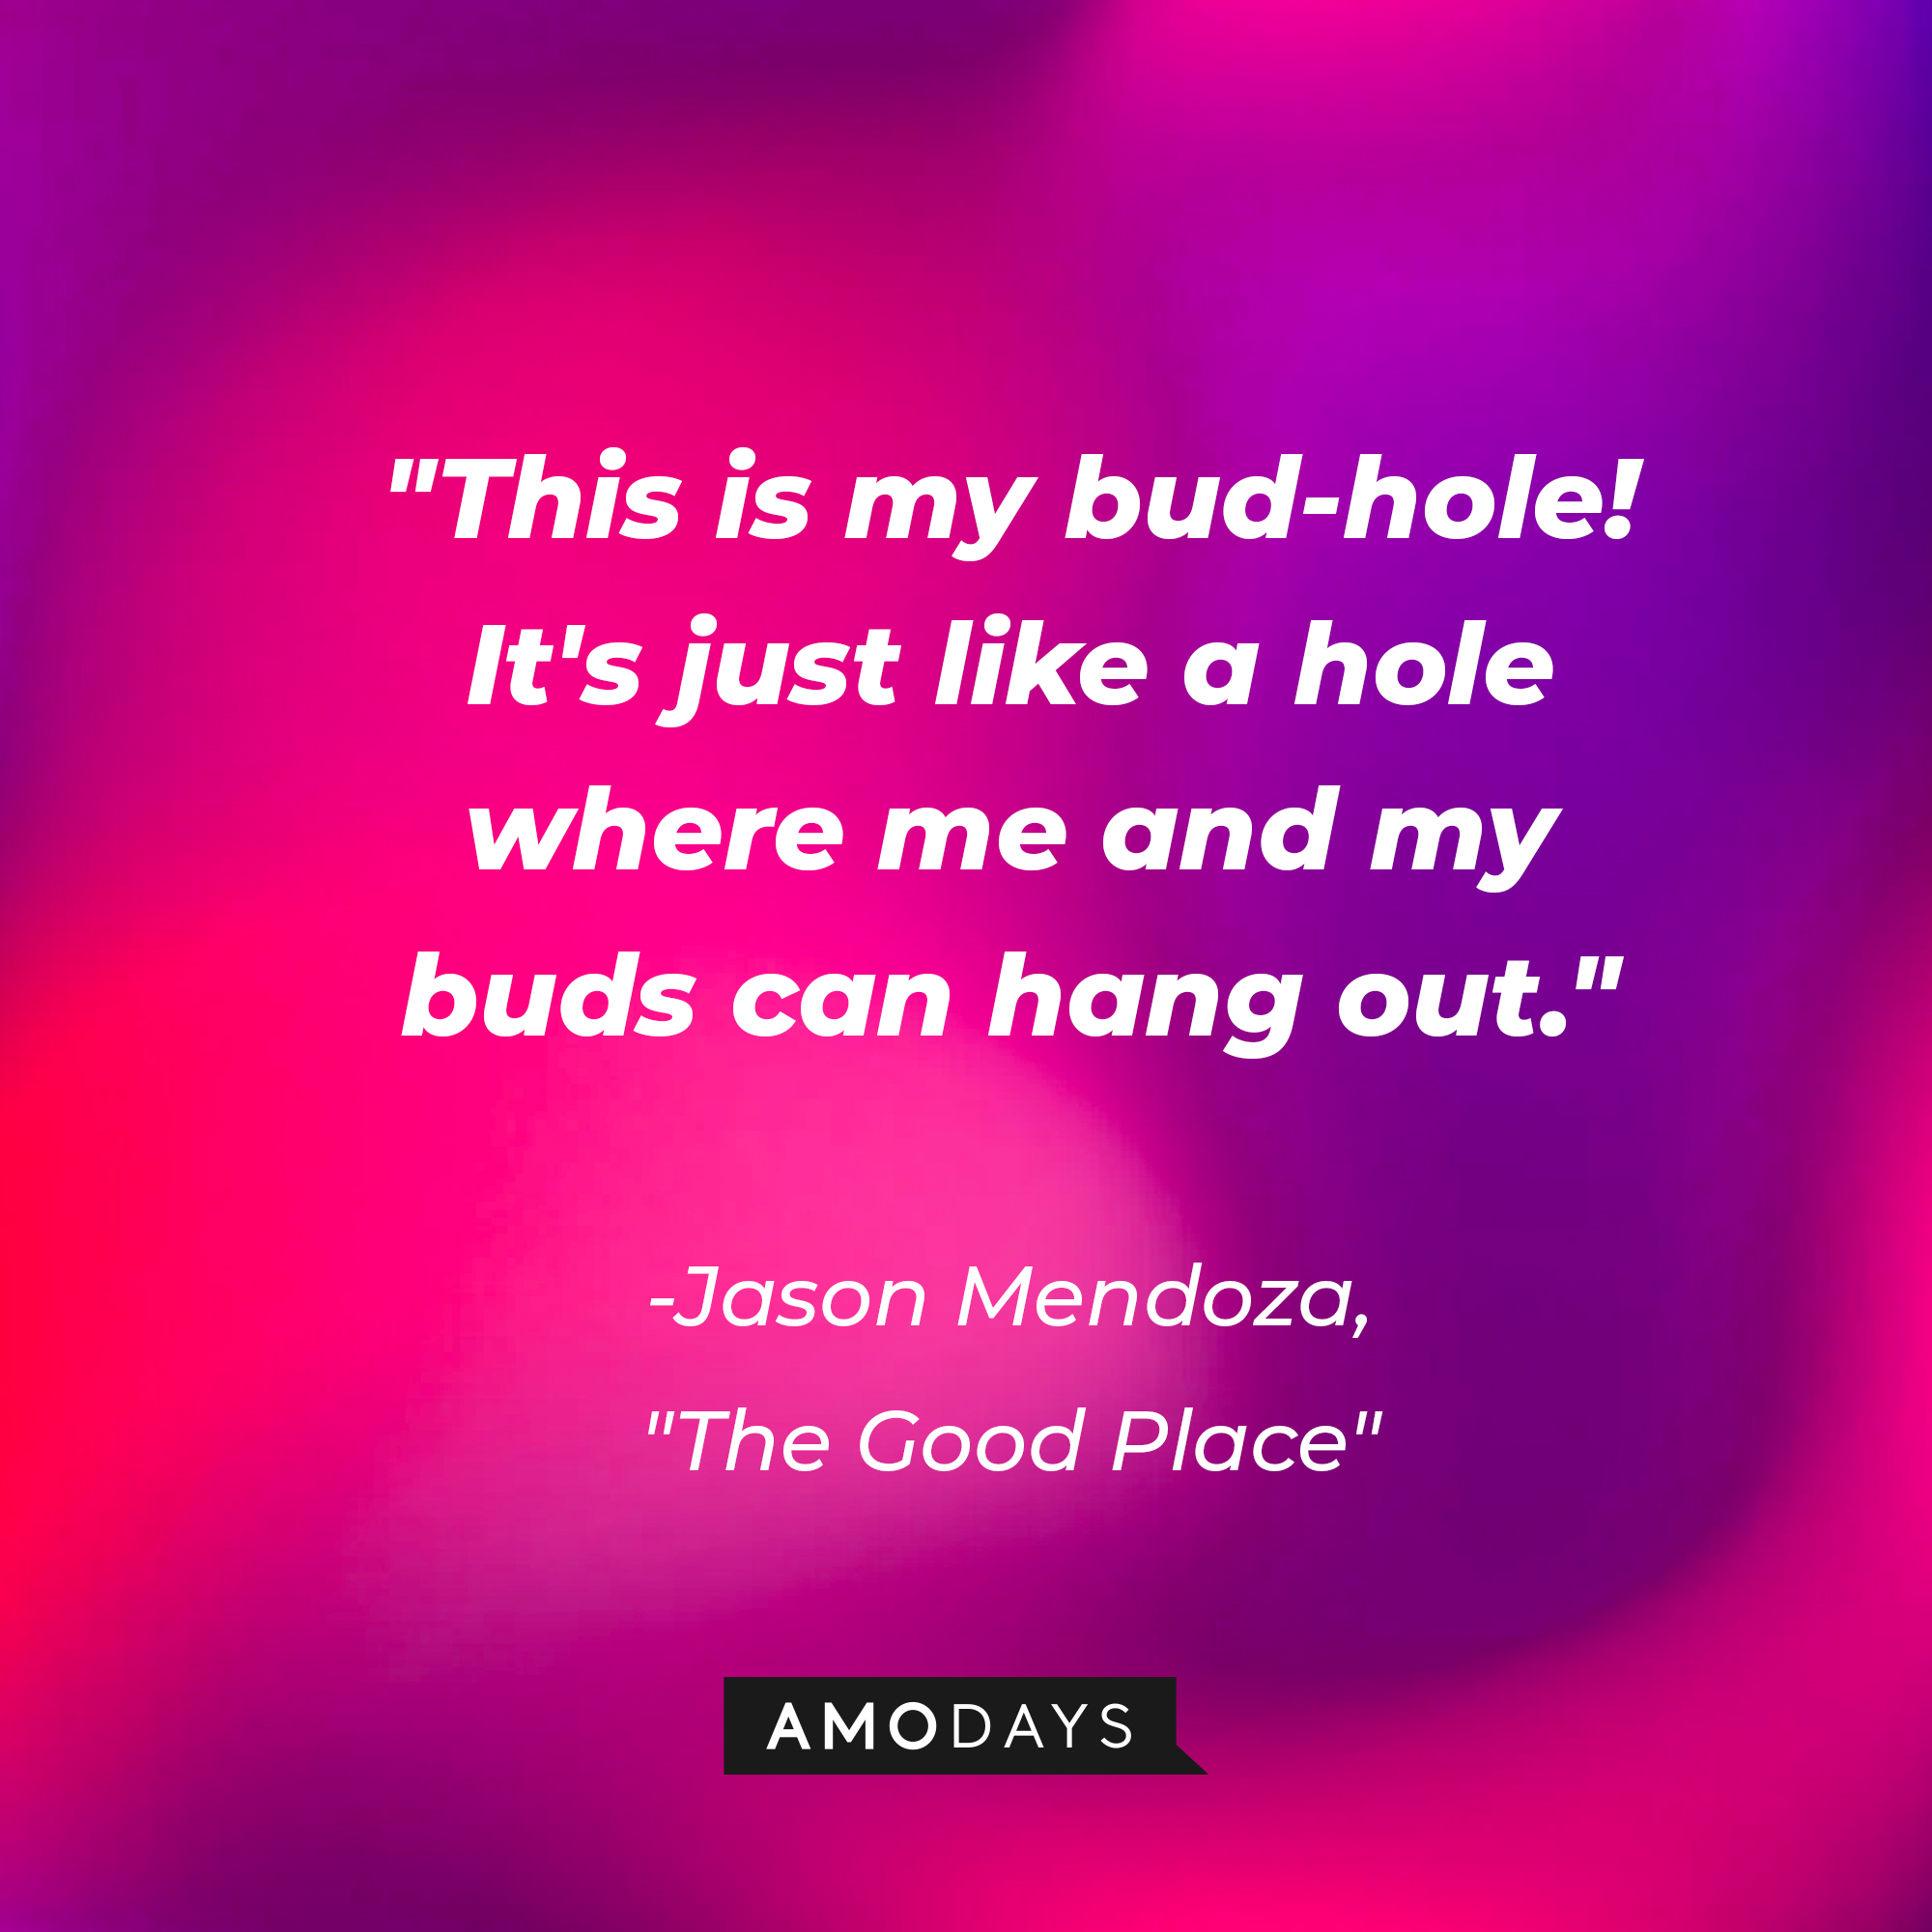 Jason Mendoza's quote in "The Good Place:" “This is my bud-hole! It's just like a hole where me and my buds can hang out.” | Source: Amodays